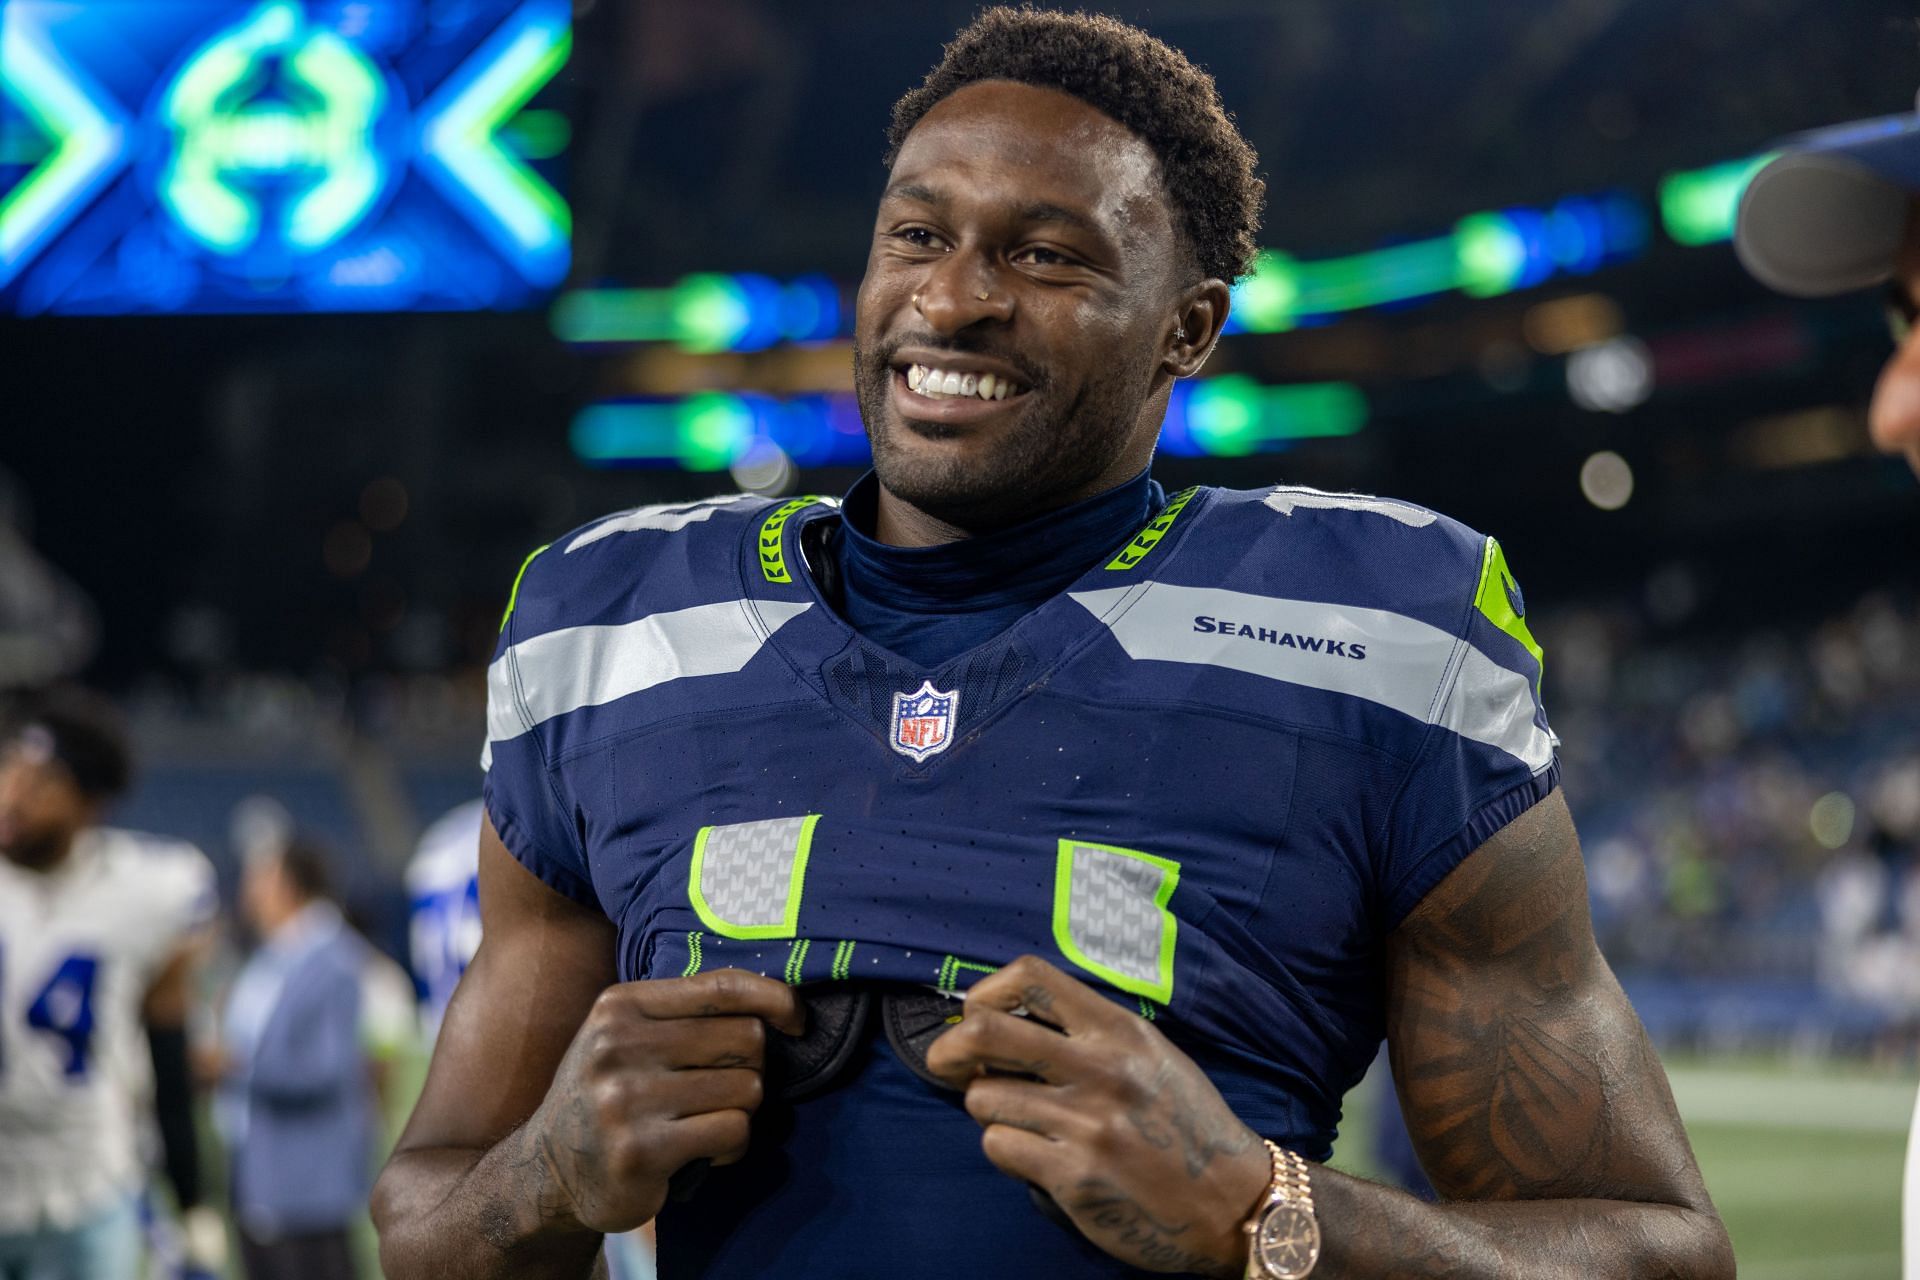 Fantasy football 2023: Seahawks WR DK Metcalf draft profile, rankings,  projections for NFL season - DraftKings Network